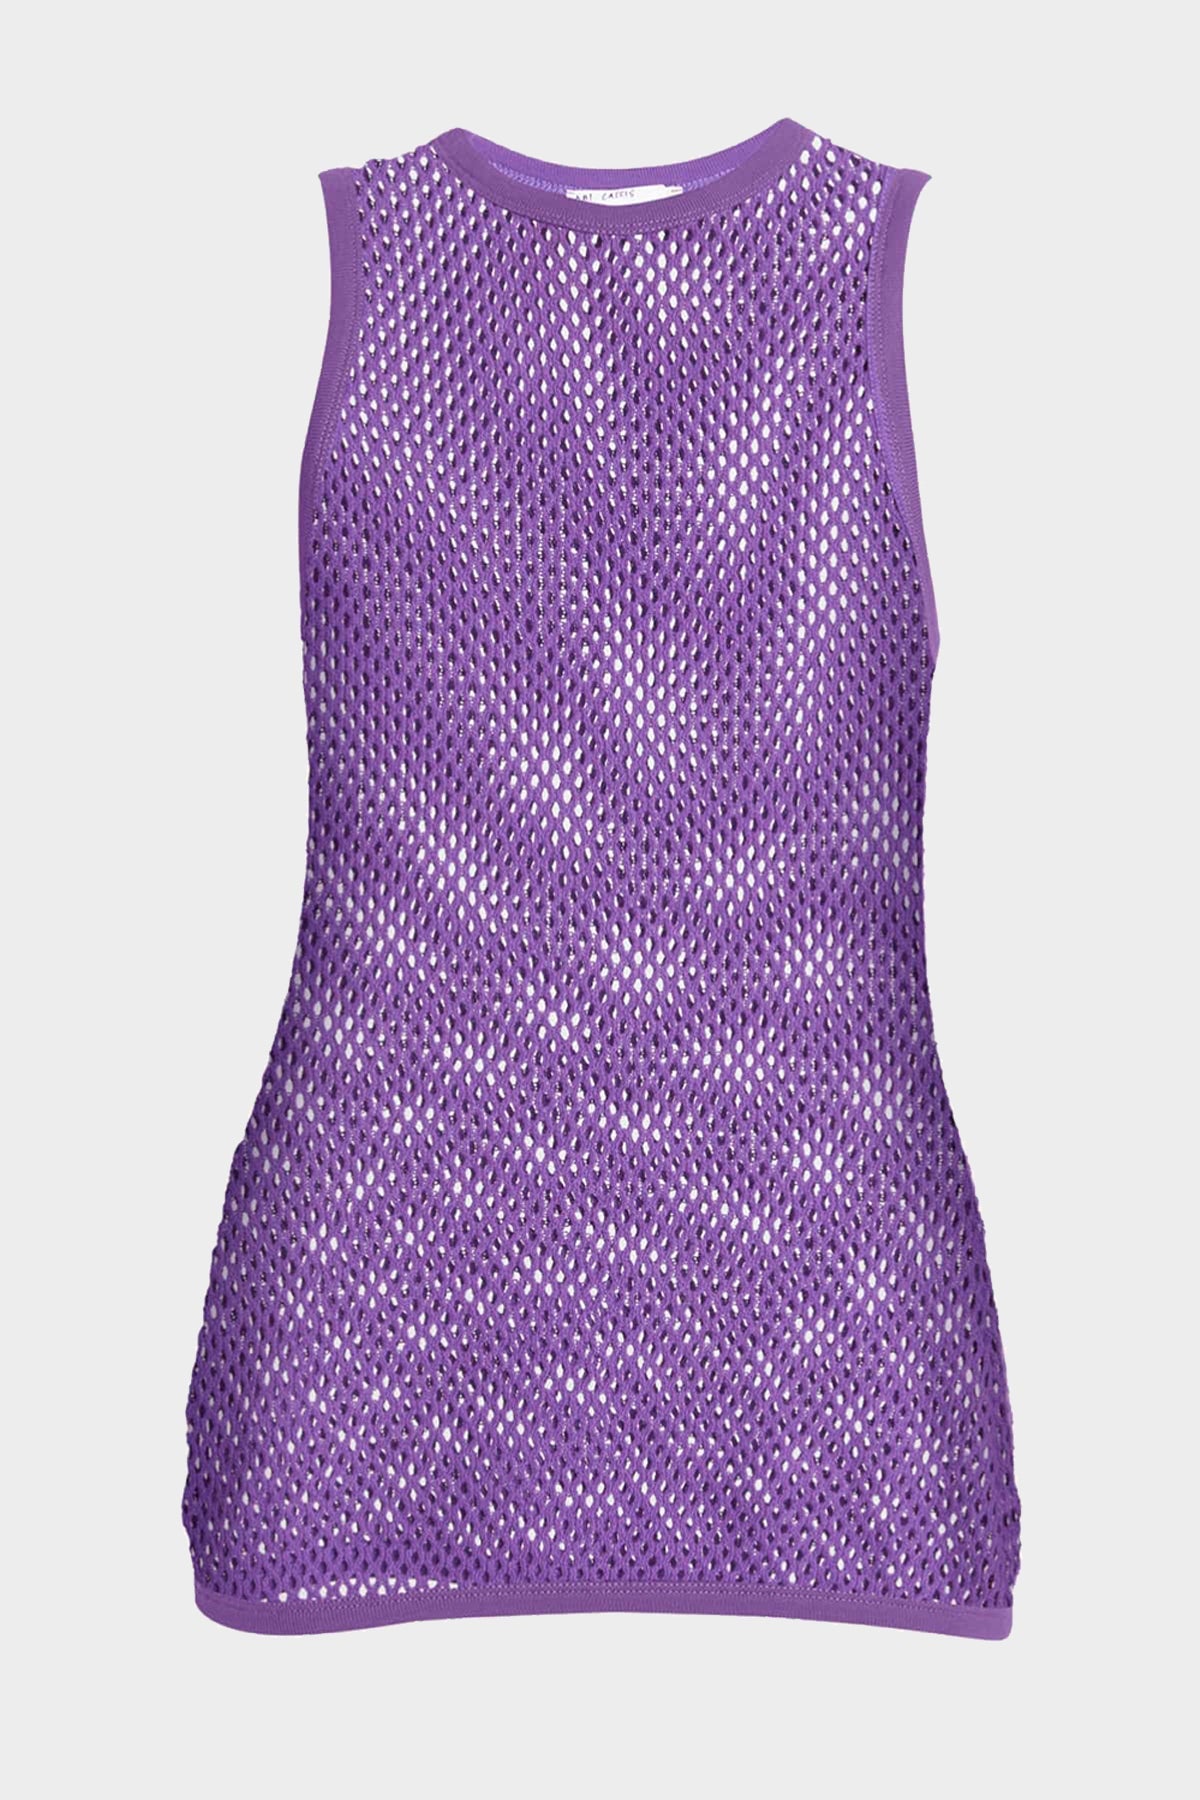 Abi Cotton Fishnet Sleeveless Top in Cassis - shop-olivia.com